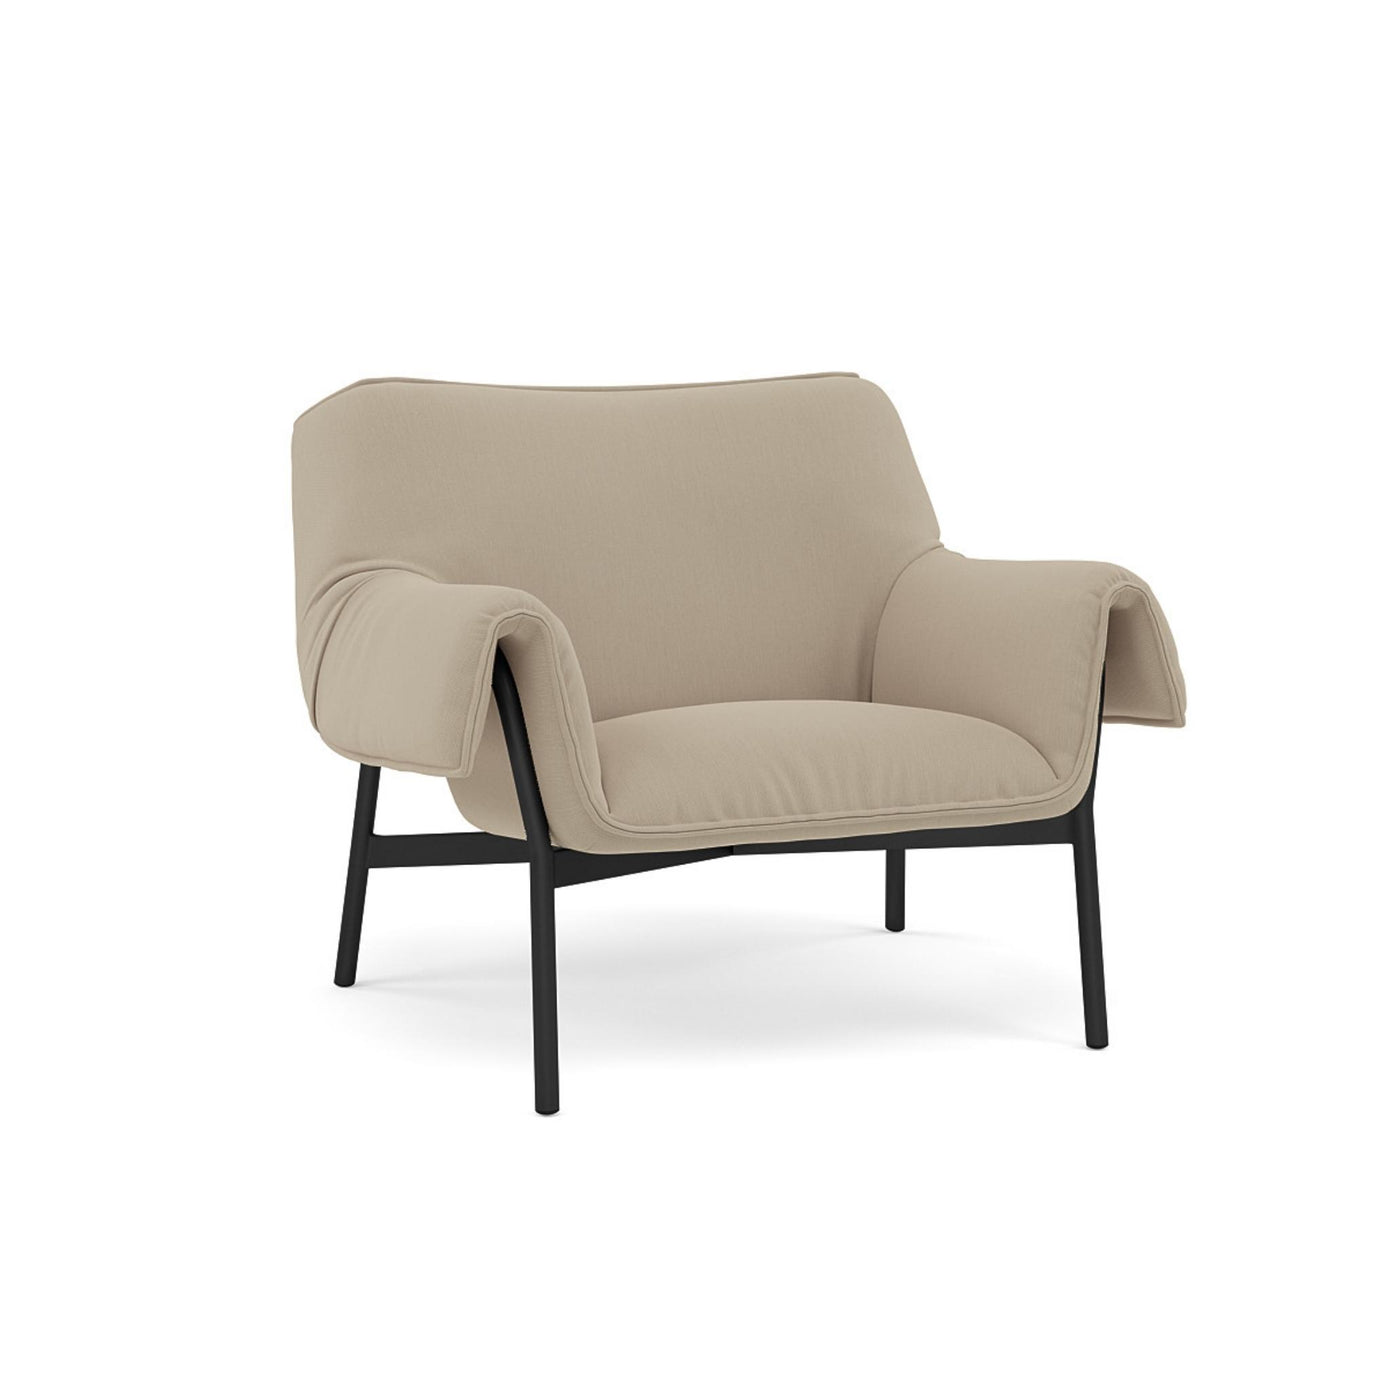 Muuto Wrap Lounge Chair. Made to order from someday designs. #colour_clara-248